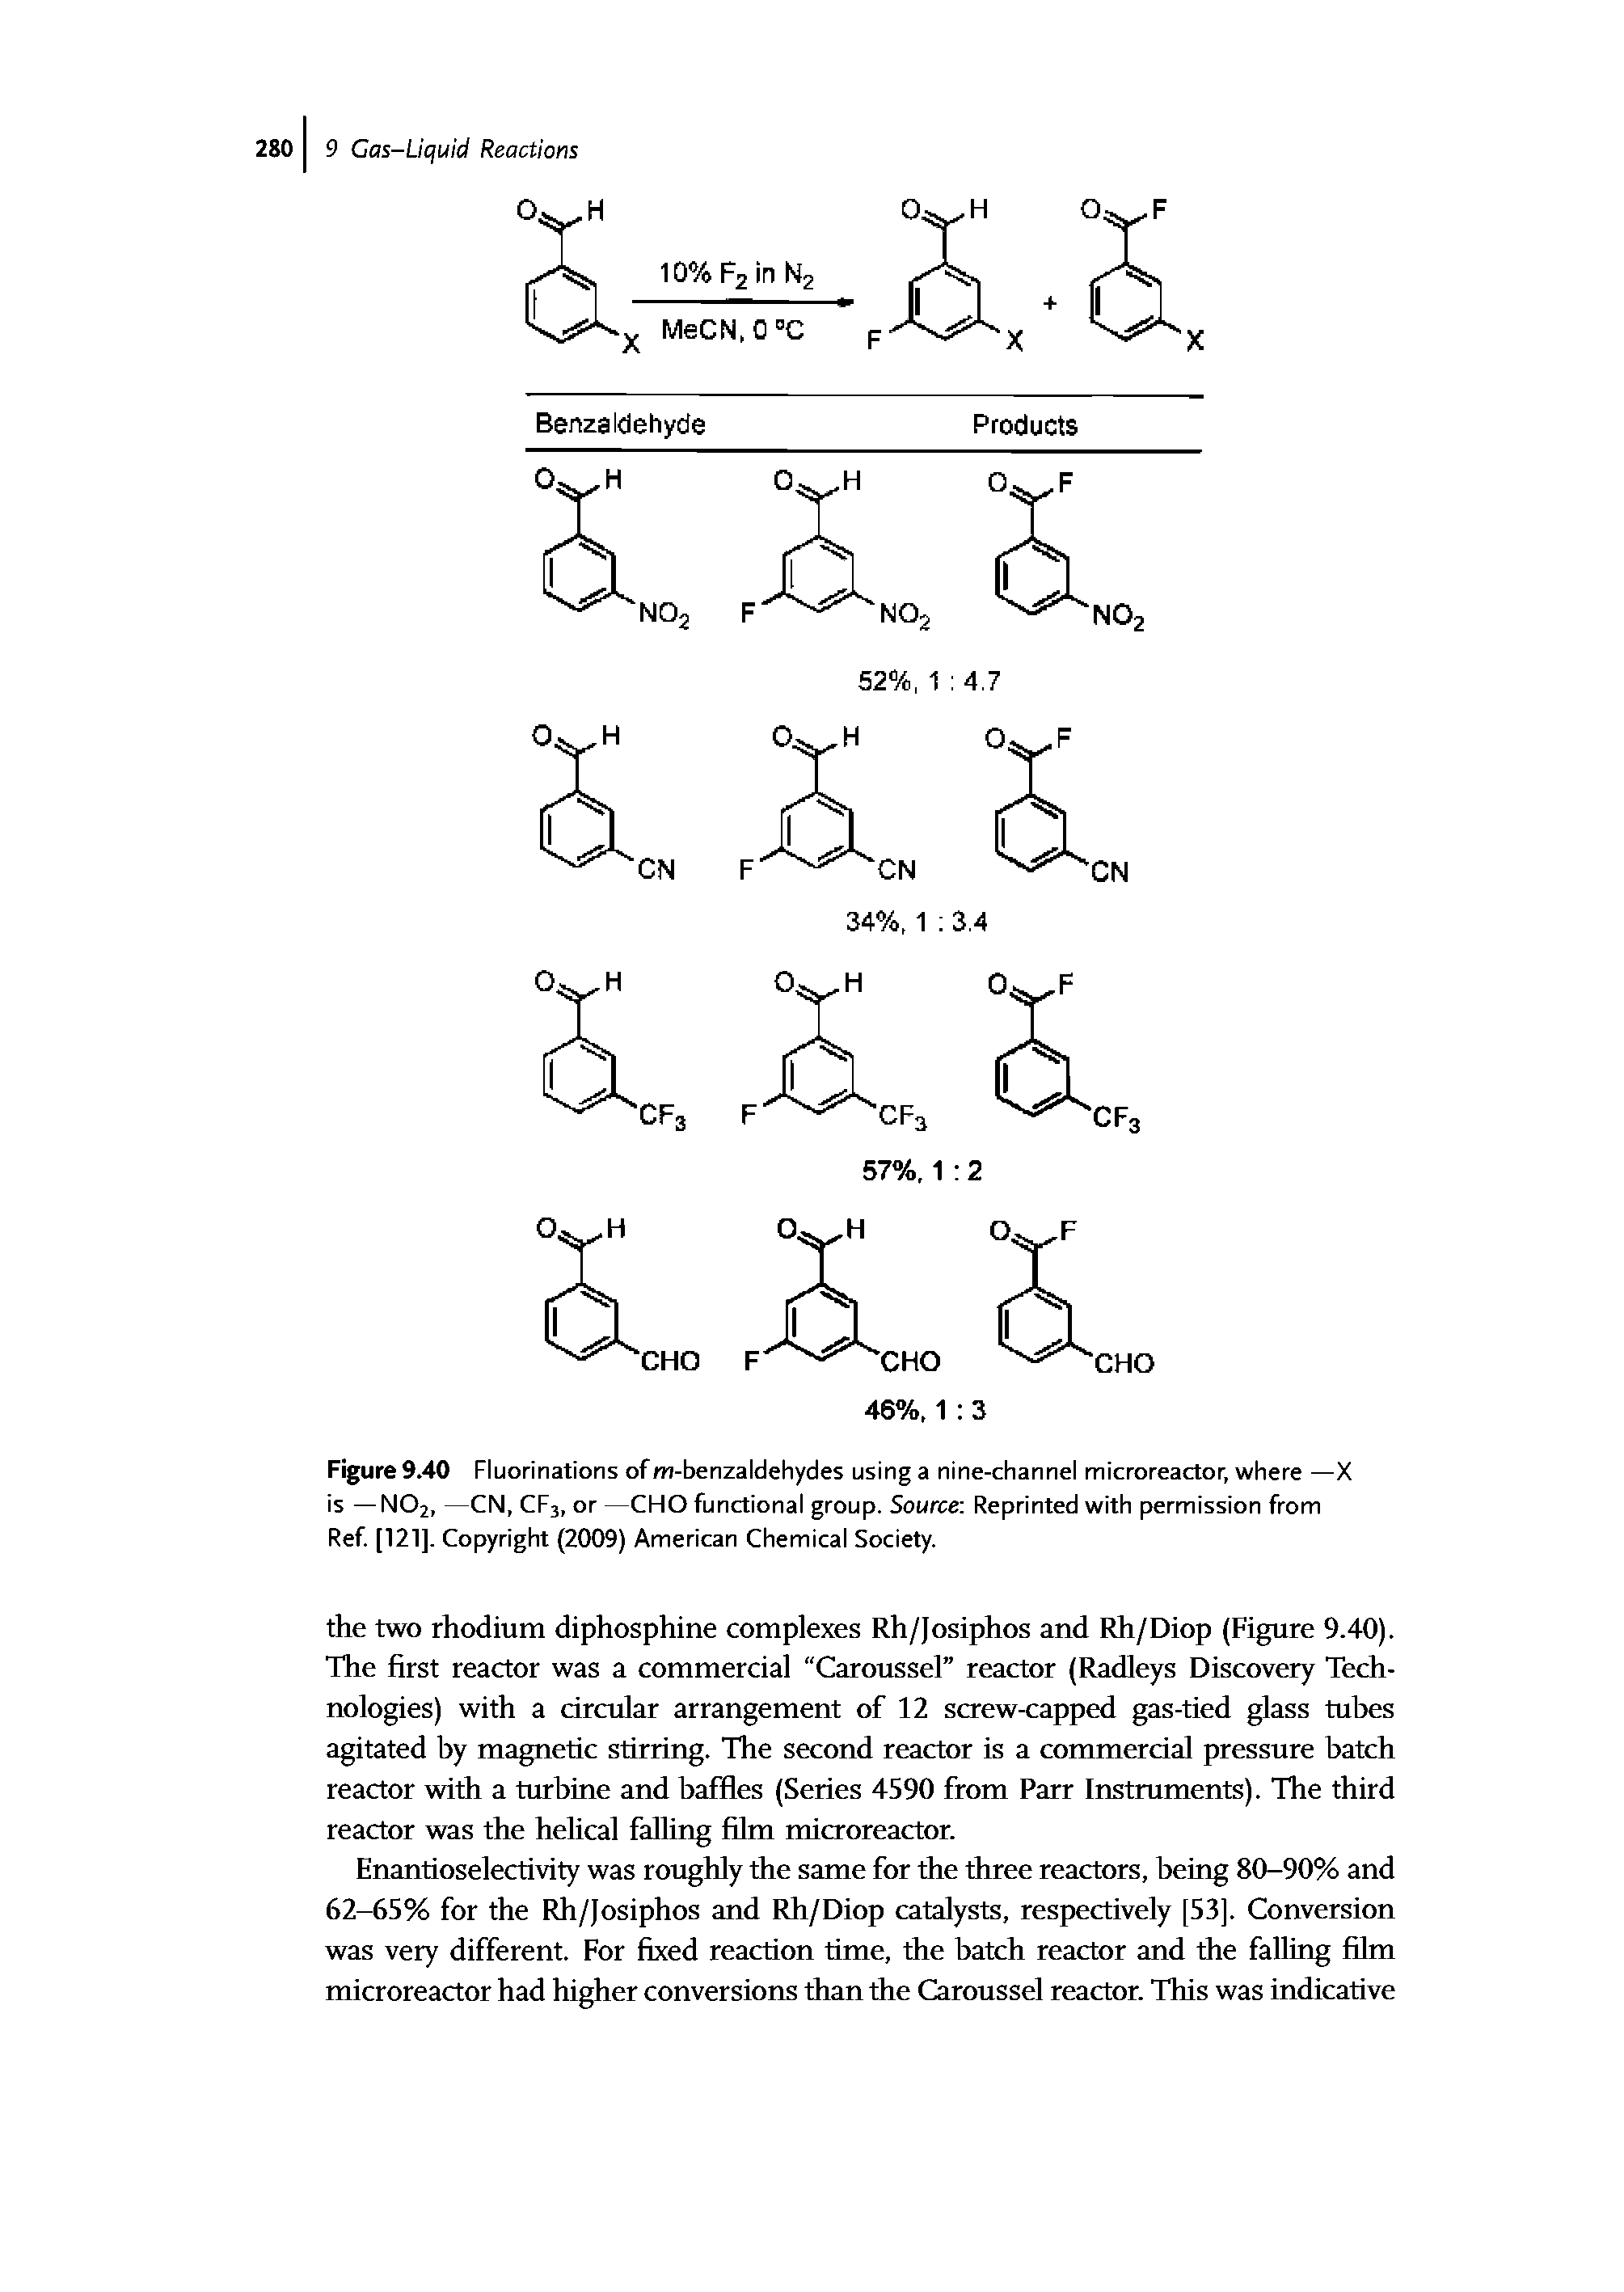 Figure 9.40 Fluorinations of m-benzaldehydes using a nine-channel microreactor, where —X is — NO2, —CN, CF3, or —CHO functional group. Source Reprinted with permission from Ref [121]. Copyright (2009) American Chemical Society.